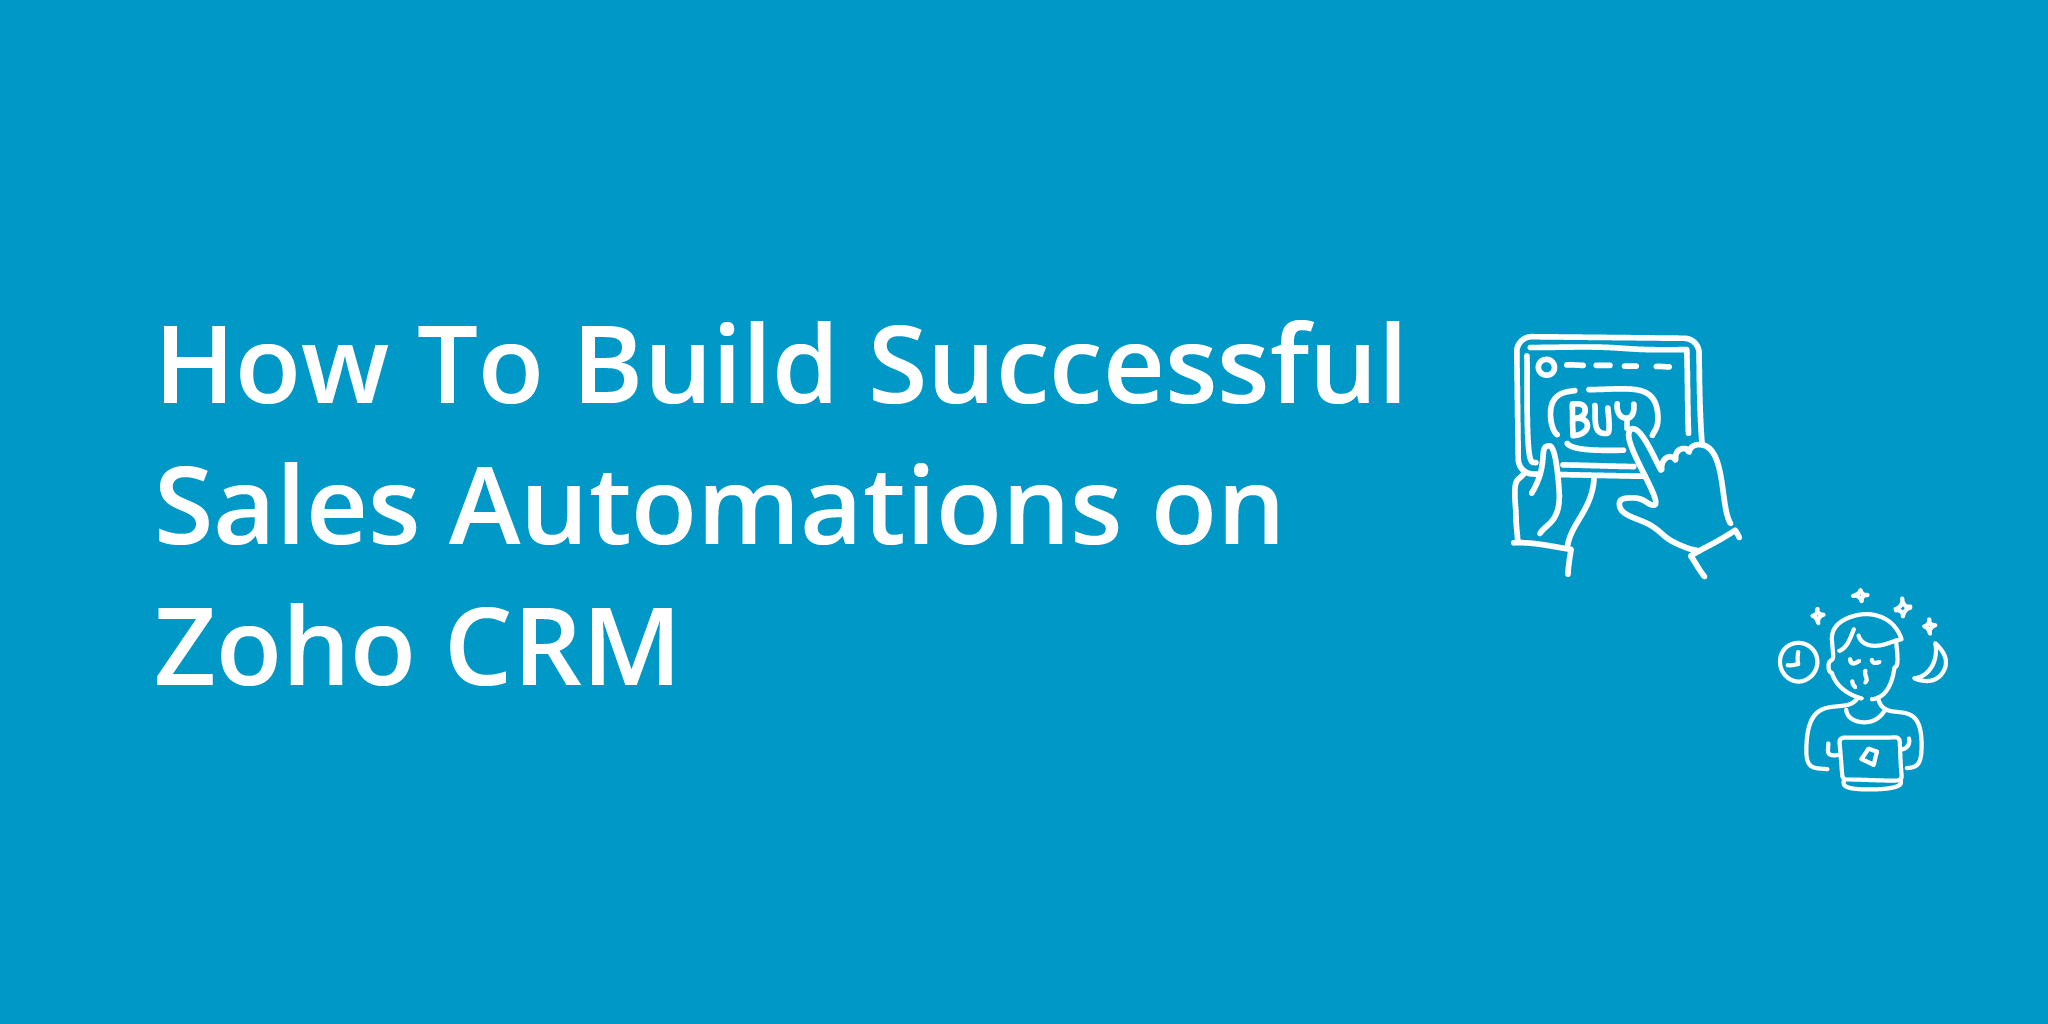 How To Build Successful Sales Automations on Zoho CRM | Telephones for business